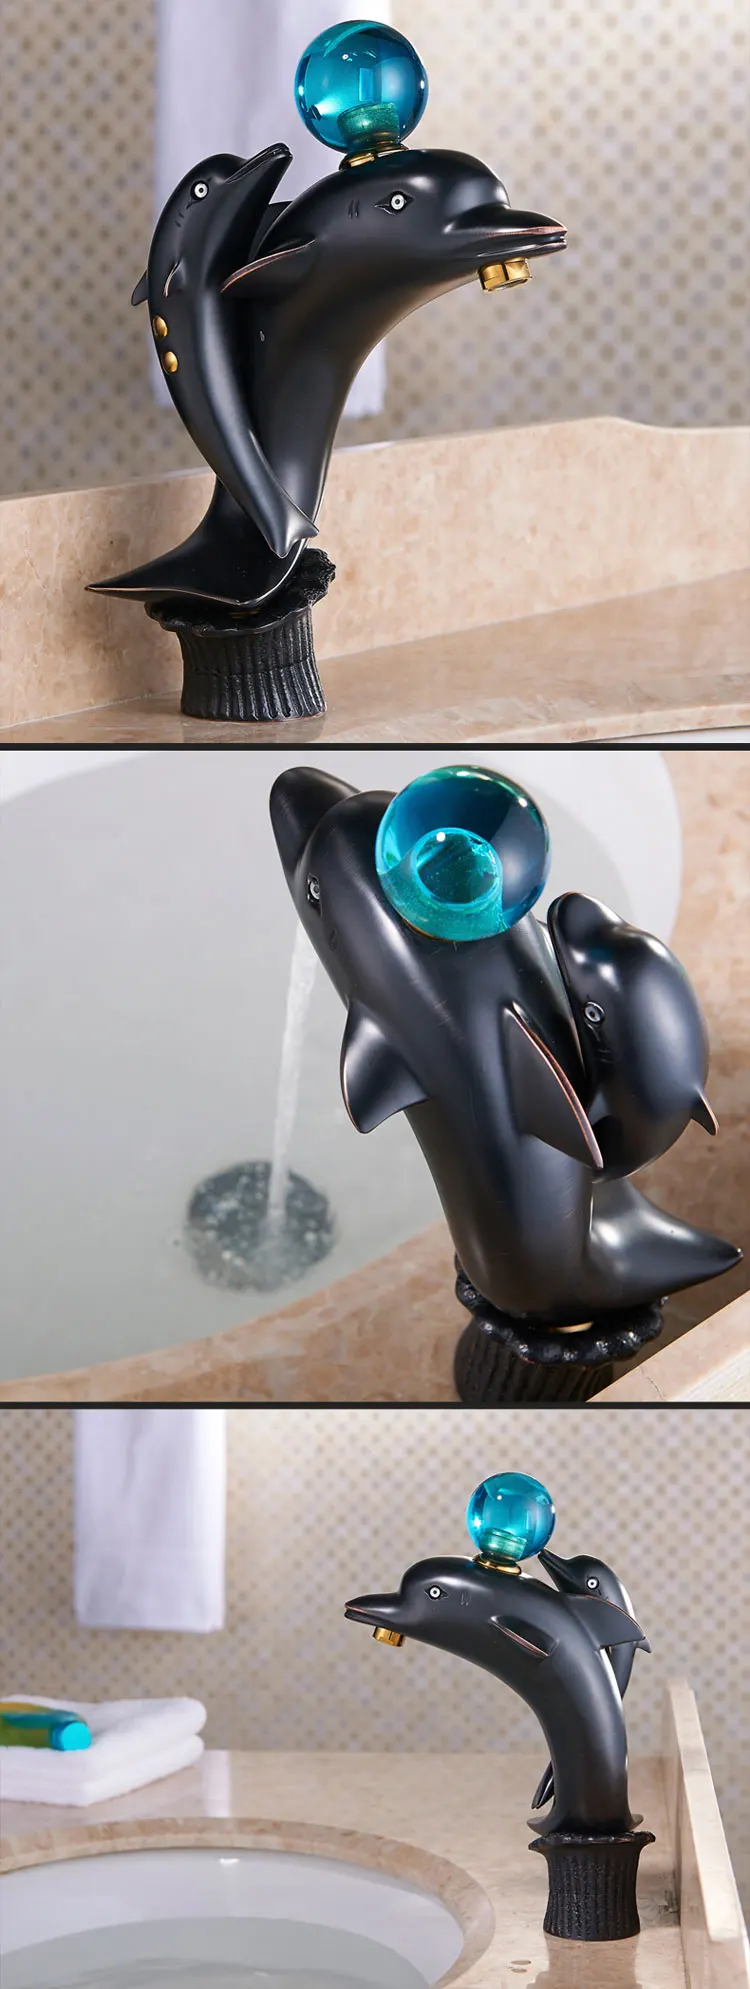 luxury bathroom design online shopping dolphin faucets